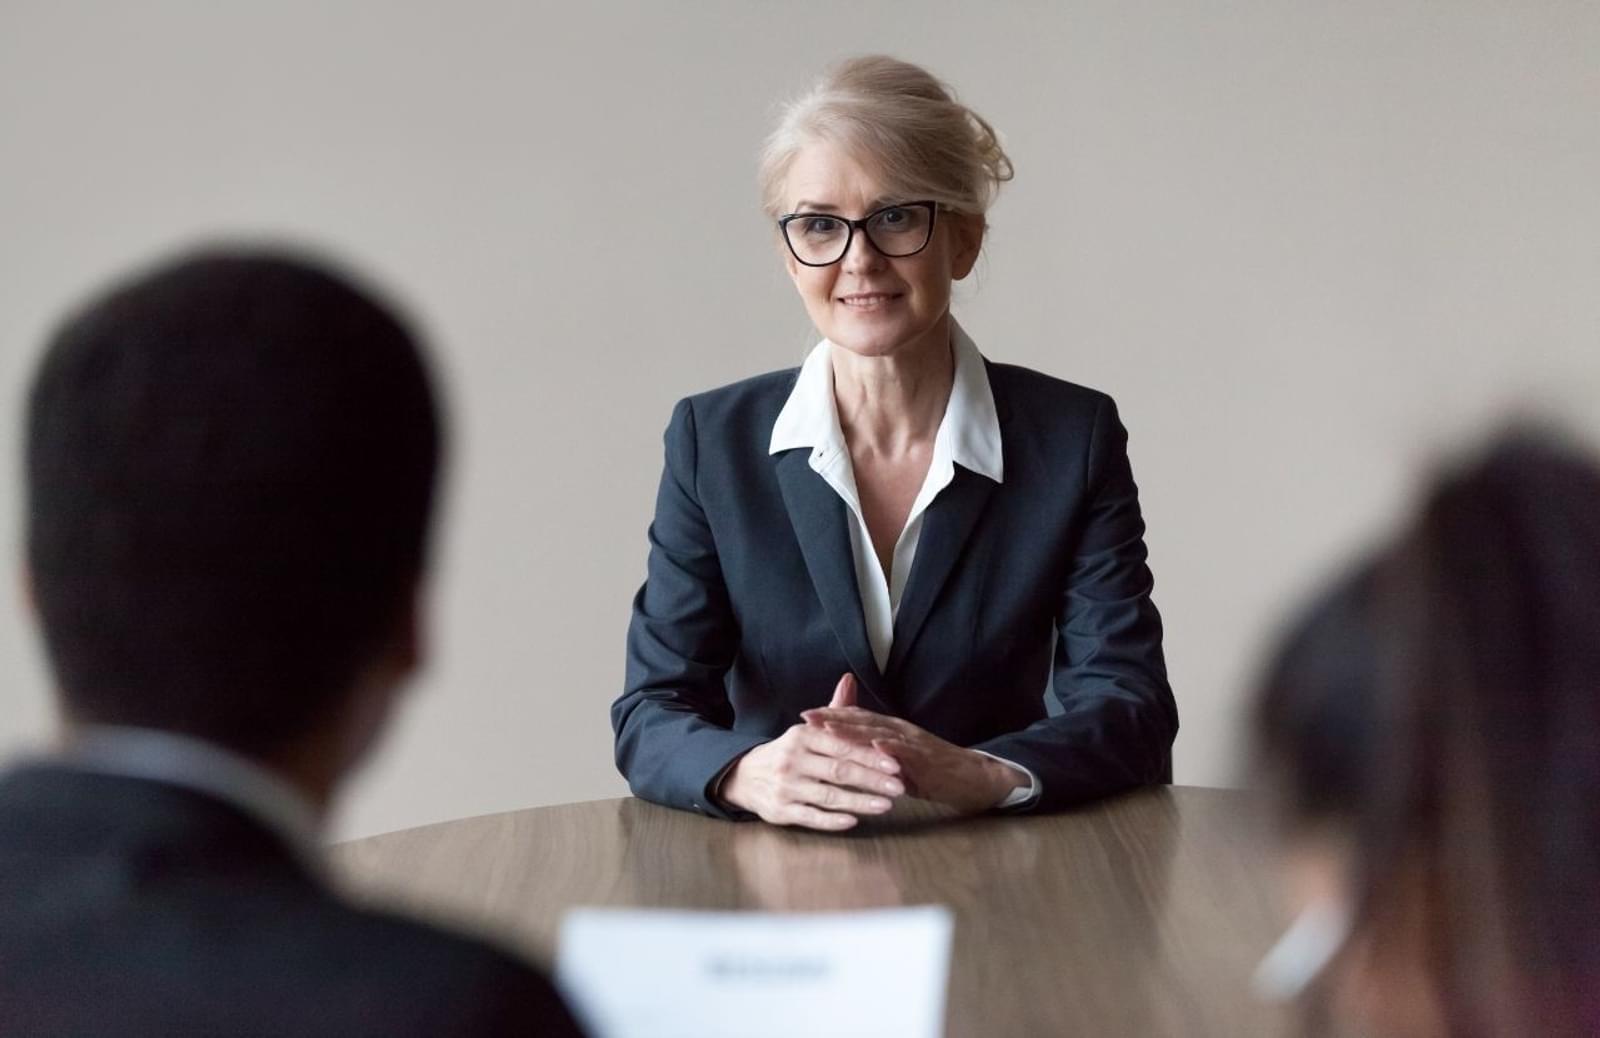 Smiling middle aged female job applicant making first impression at interview